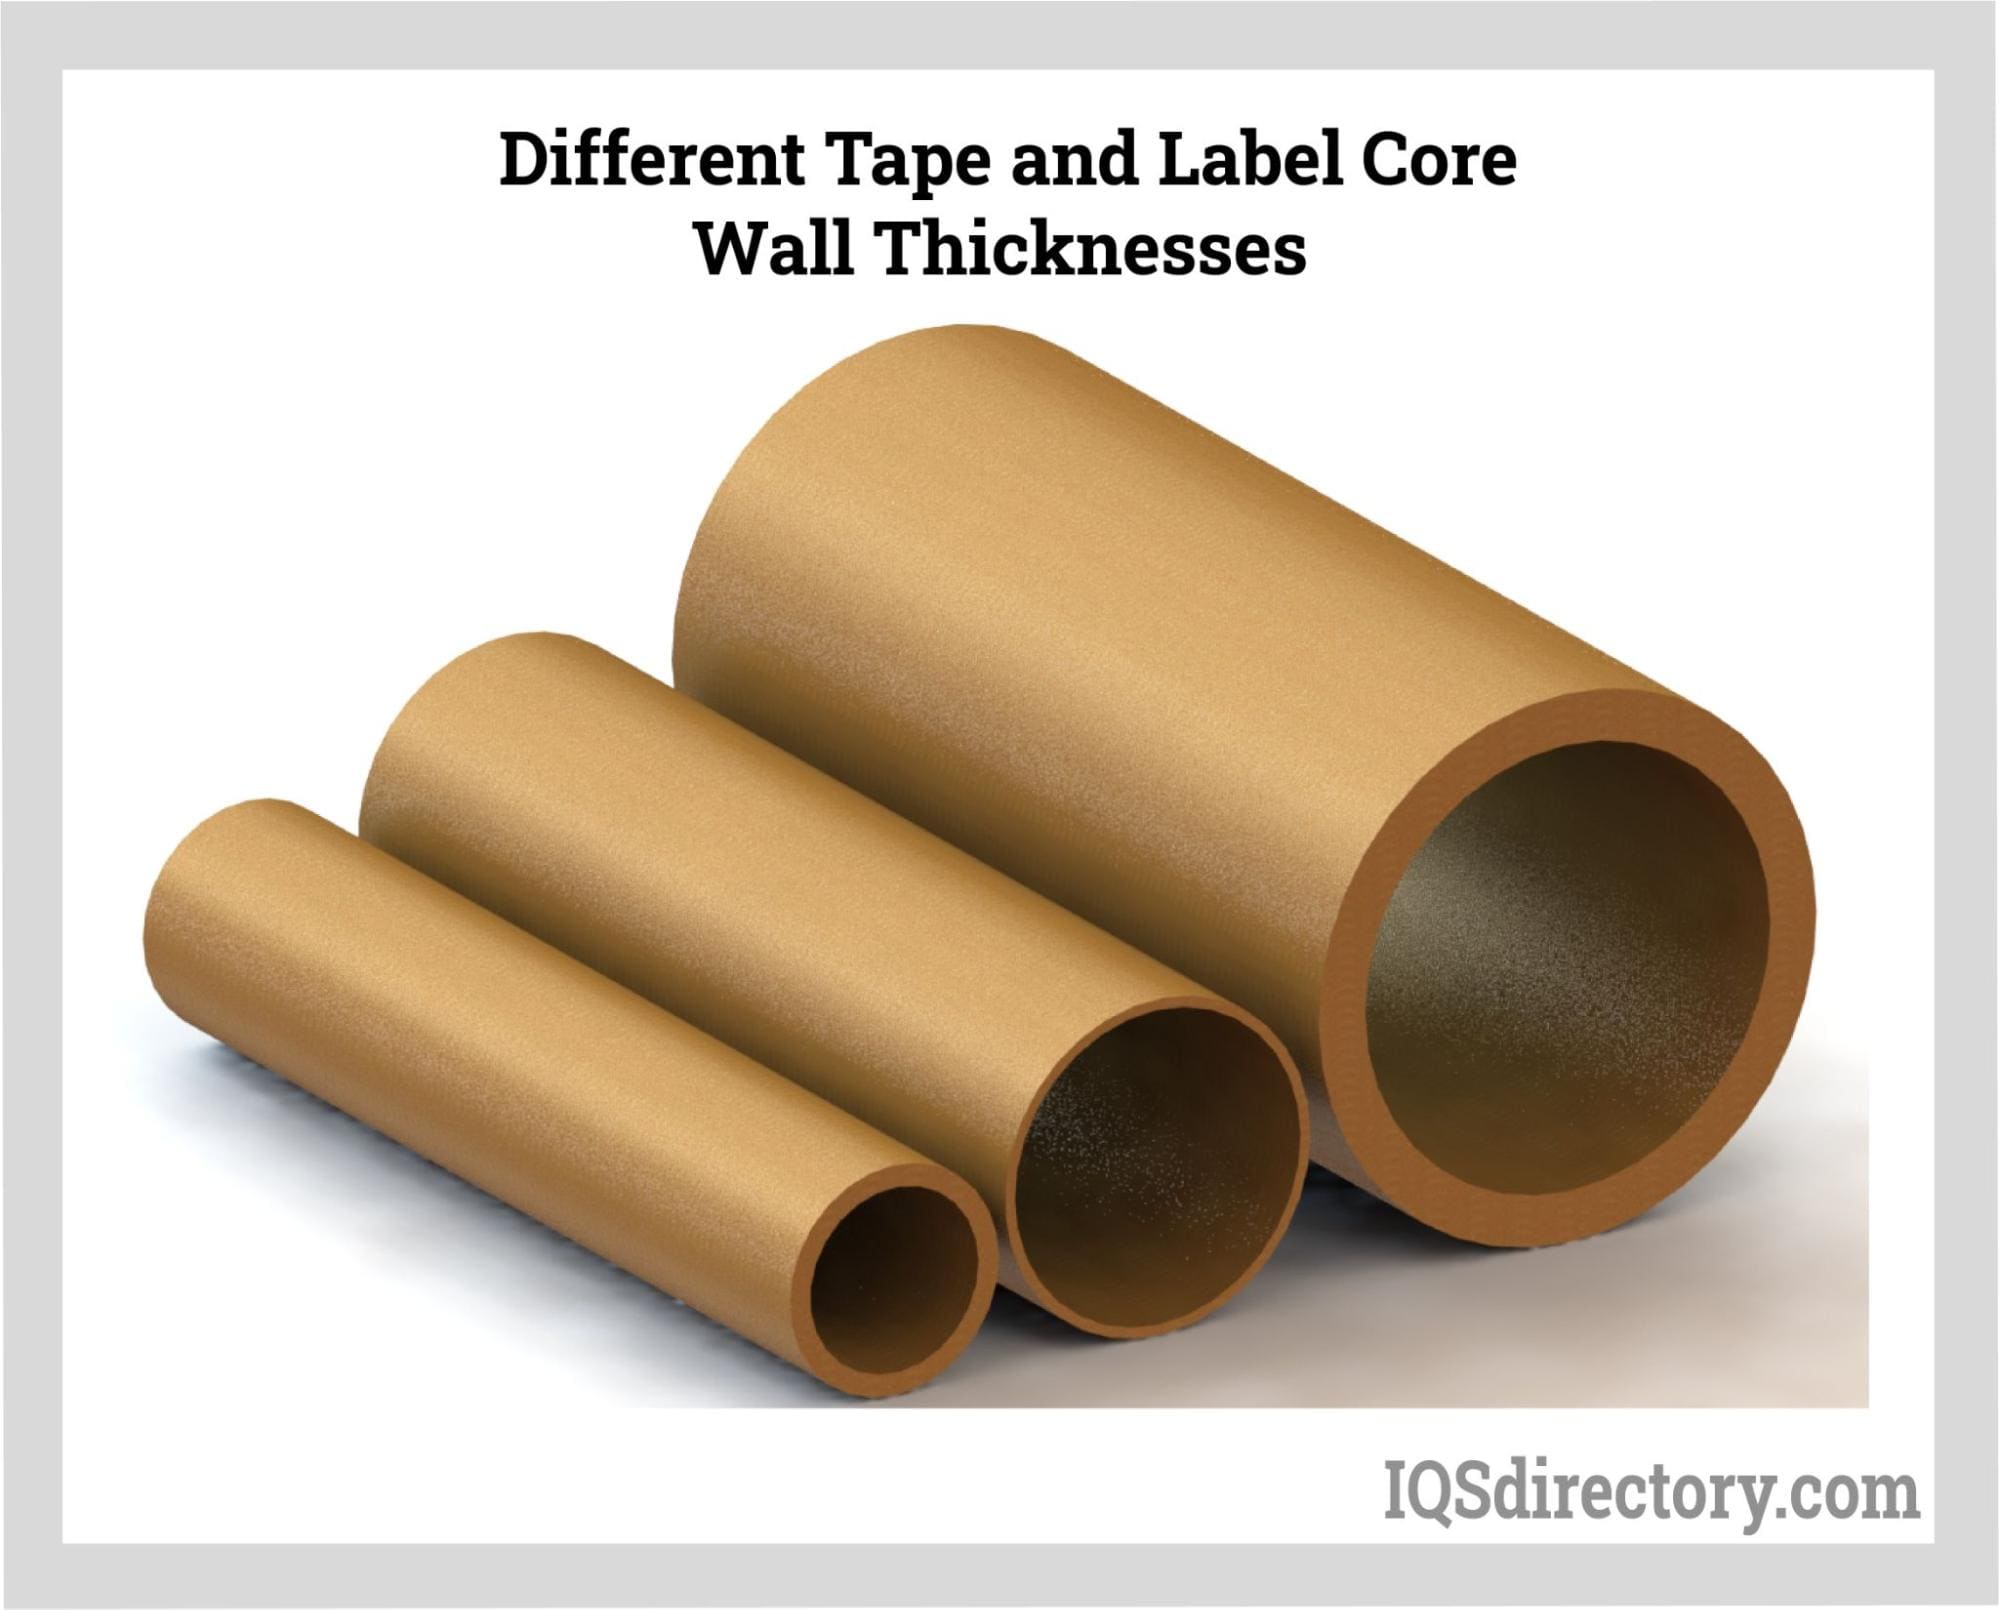 Different Tape and Label Core Wall Thicknesses